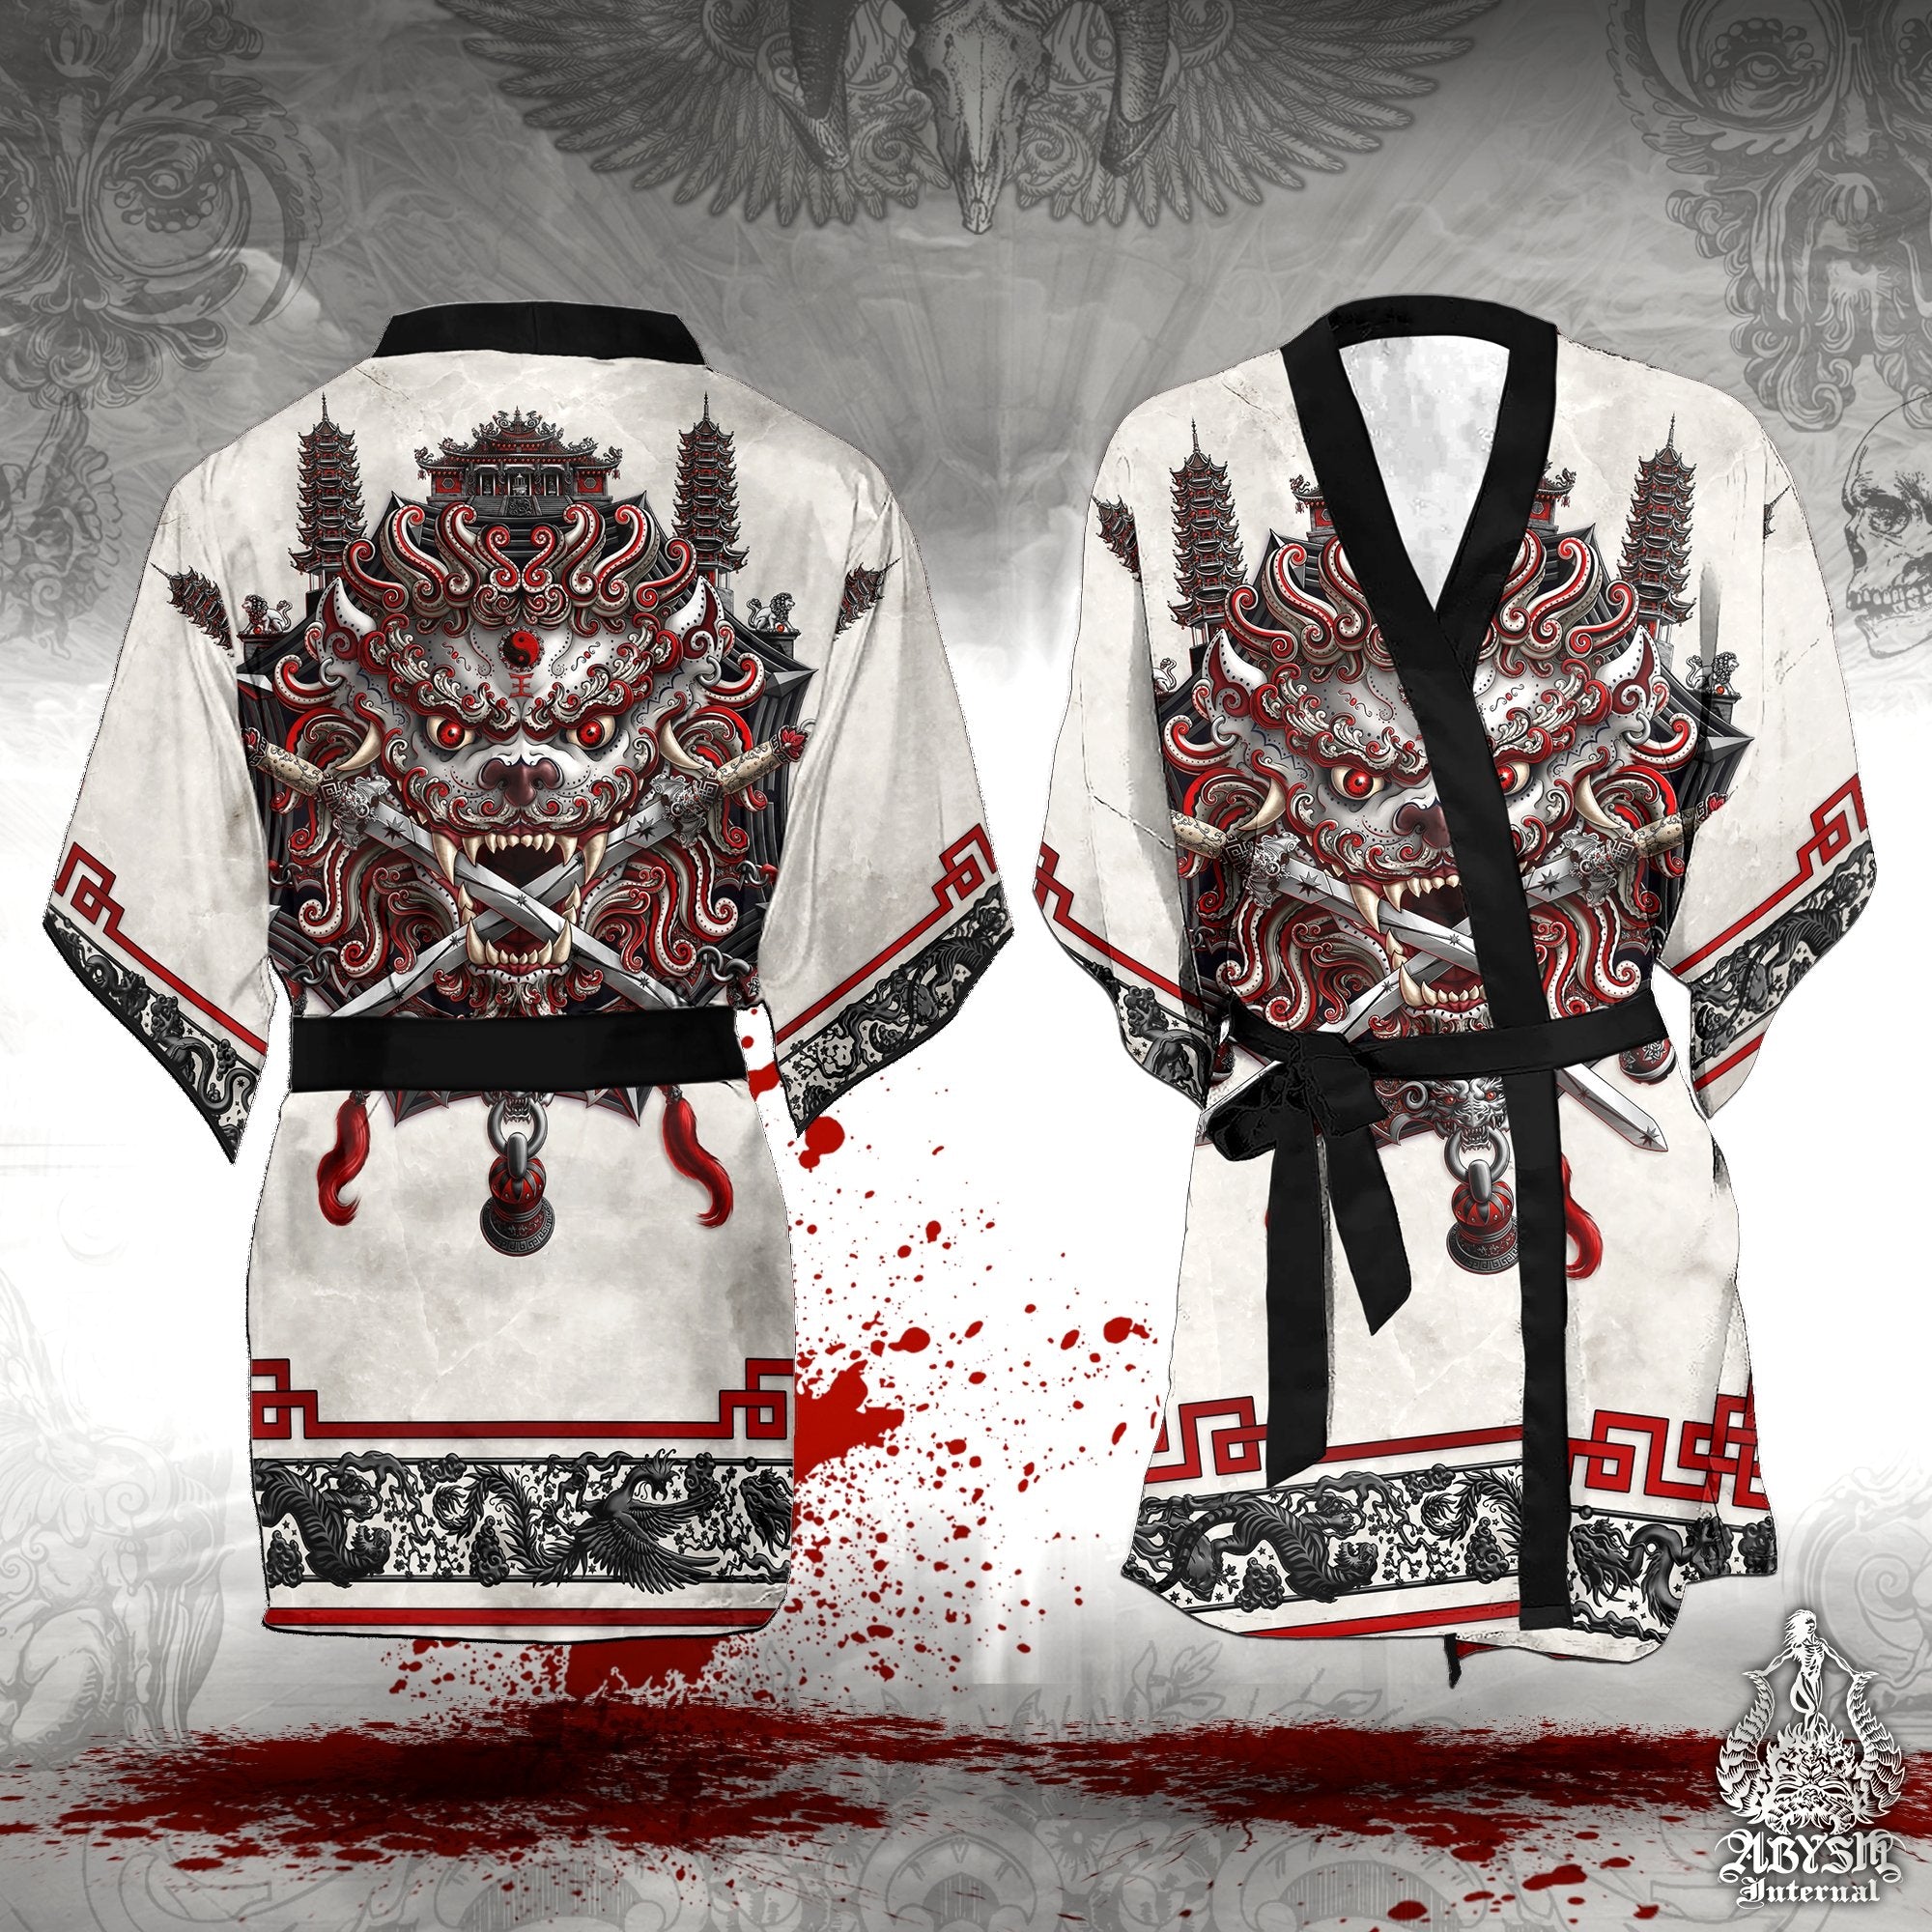 Sword Lion Cover Up, Beach Outfit, Chinese Party Kimono, Taiwan Summer Festival Robe, Asian Indie and Alternative Clothing, Unisex - Bloody White Goth - Abysm Internal